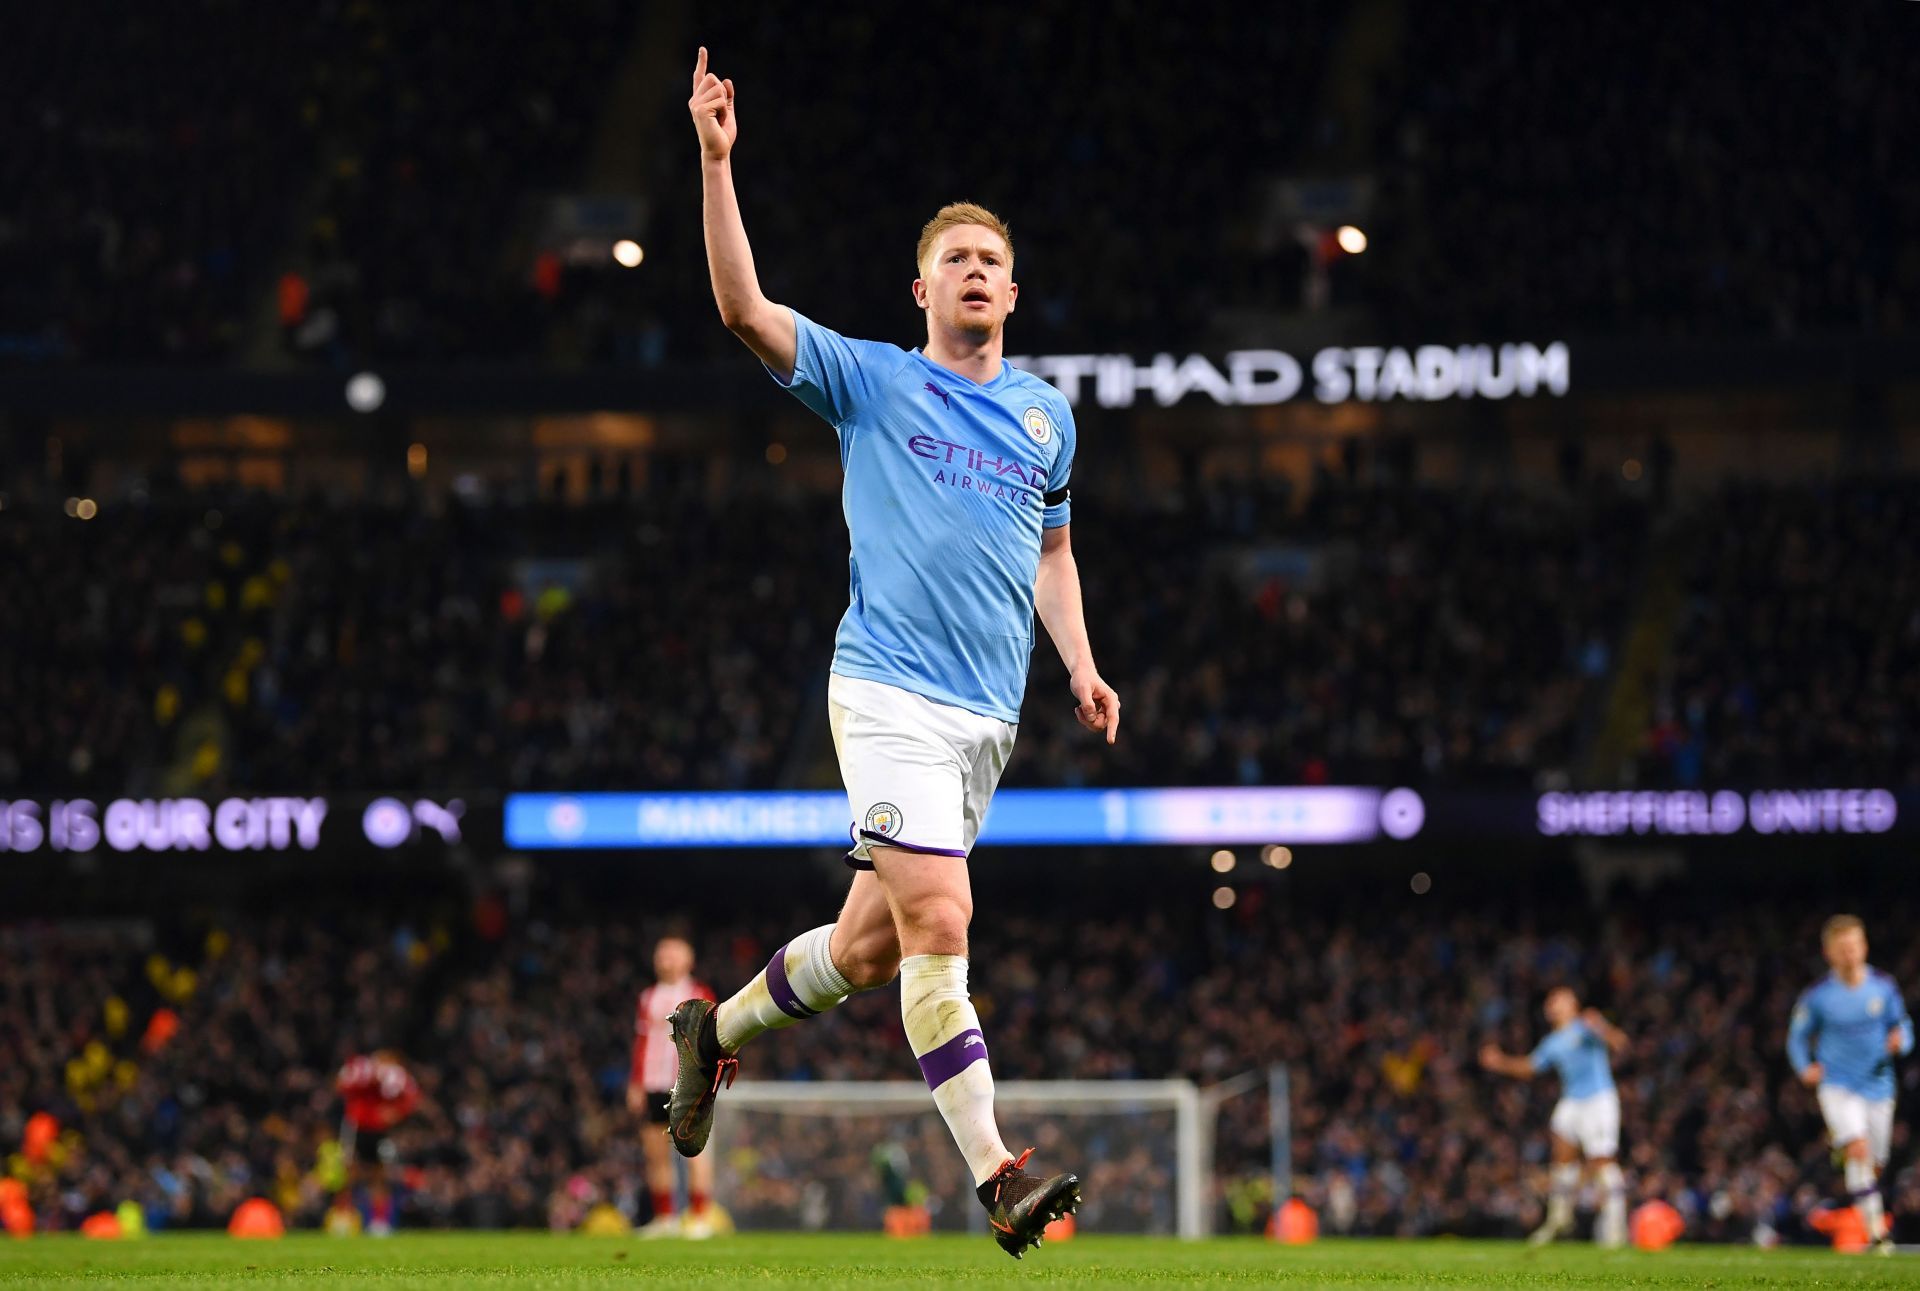 Kevin De Bruyne is one of the best midfielders in the world right now